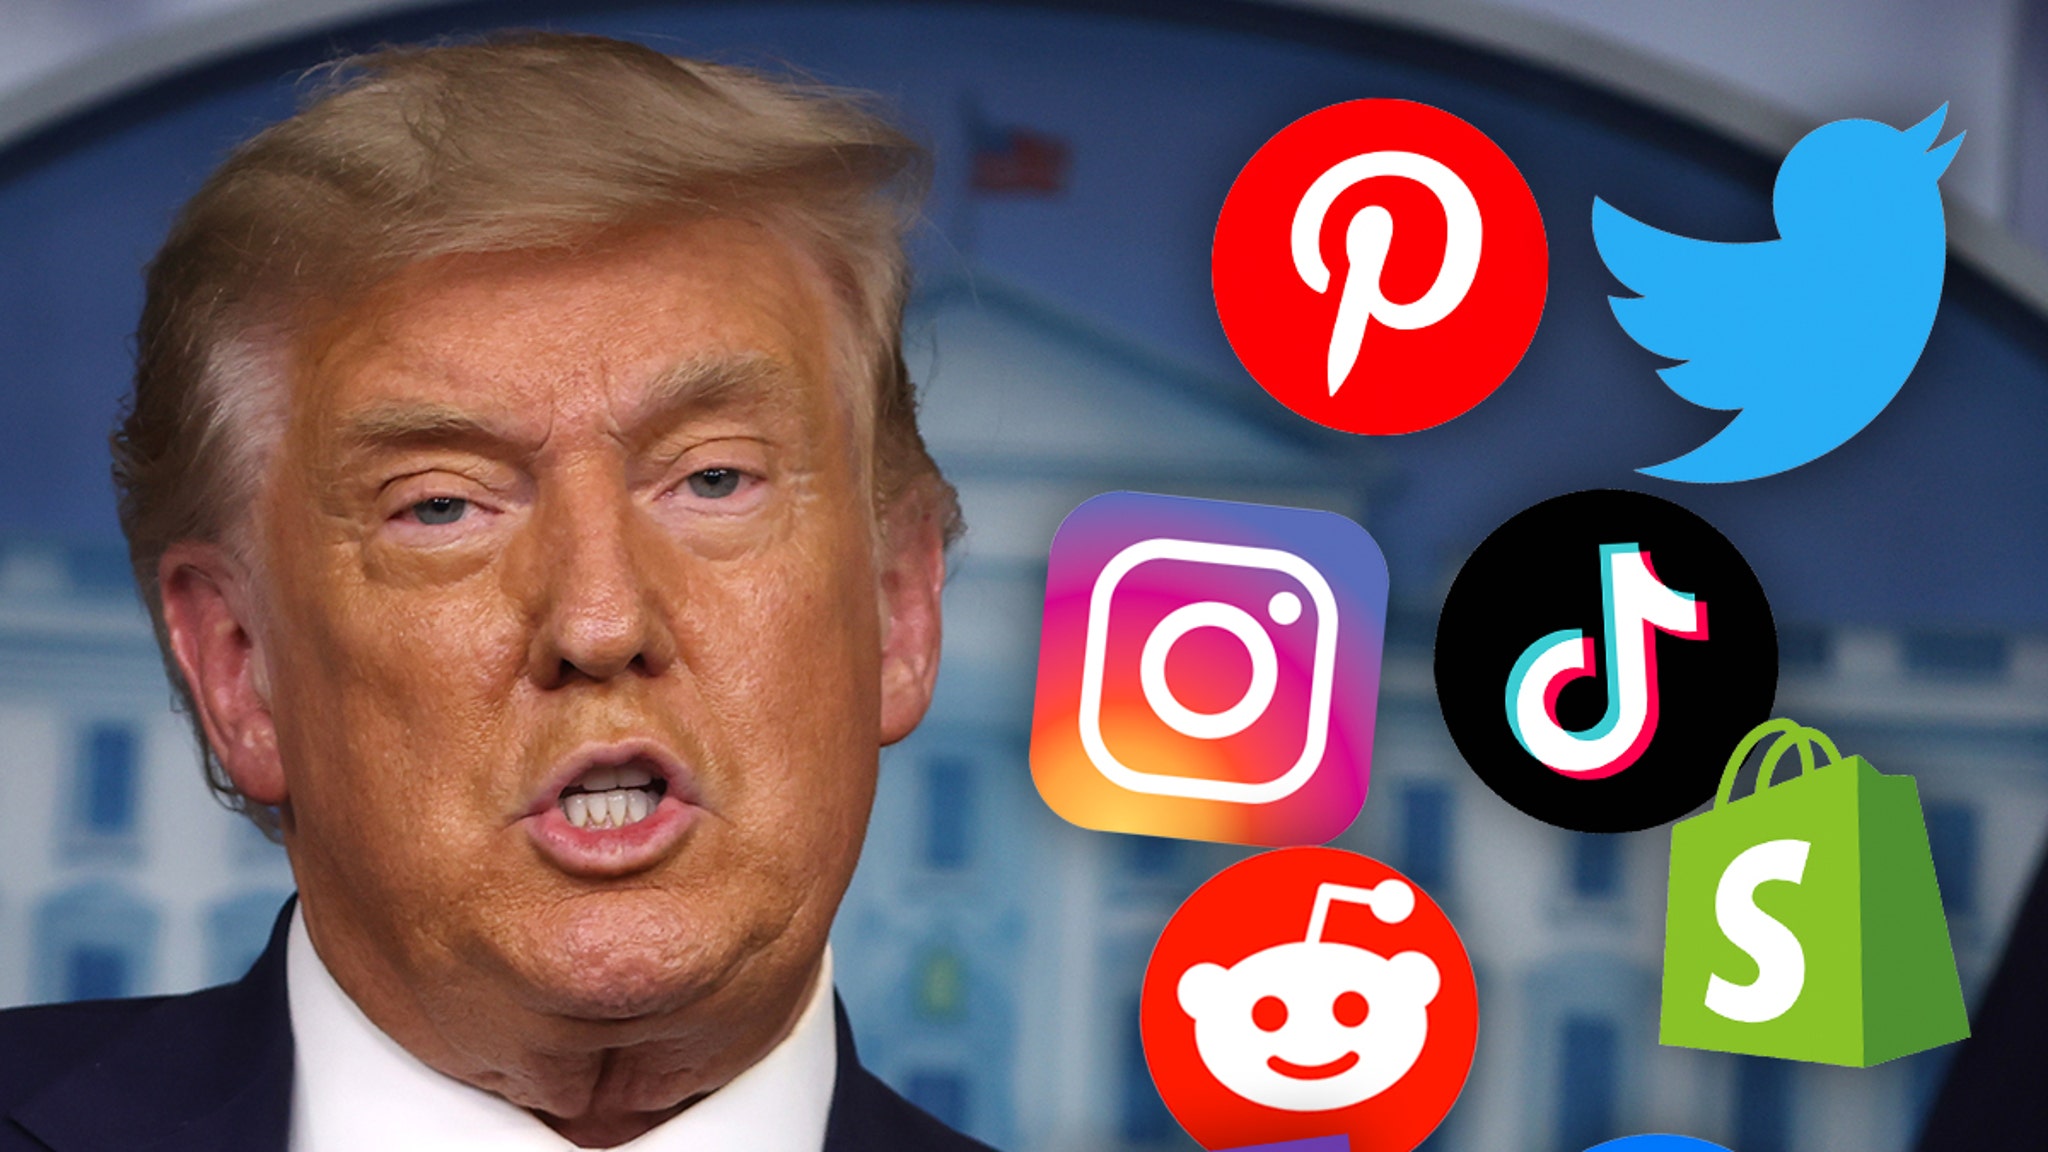 Trump has also been banned from major social media platforms, Pinterest and Shopify